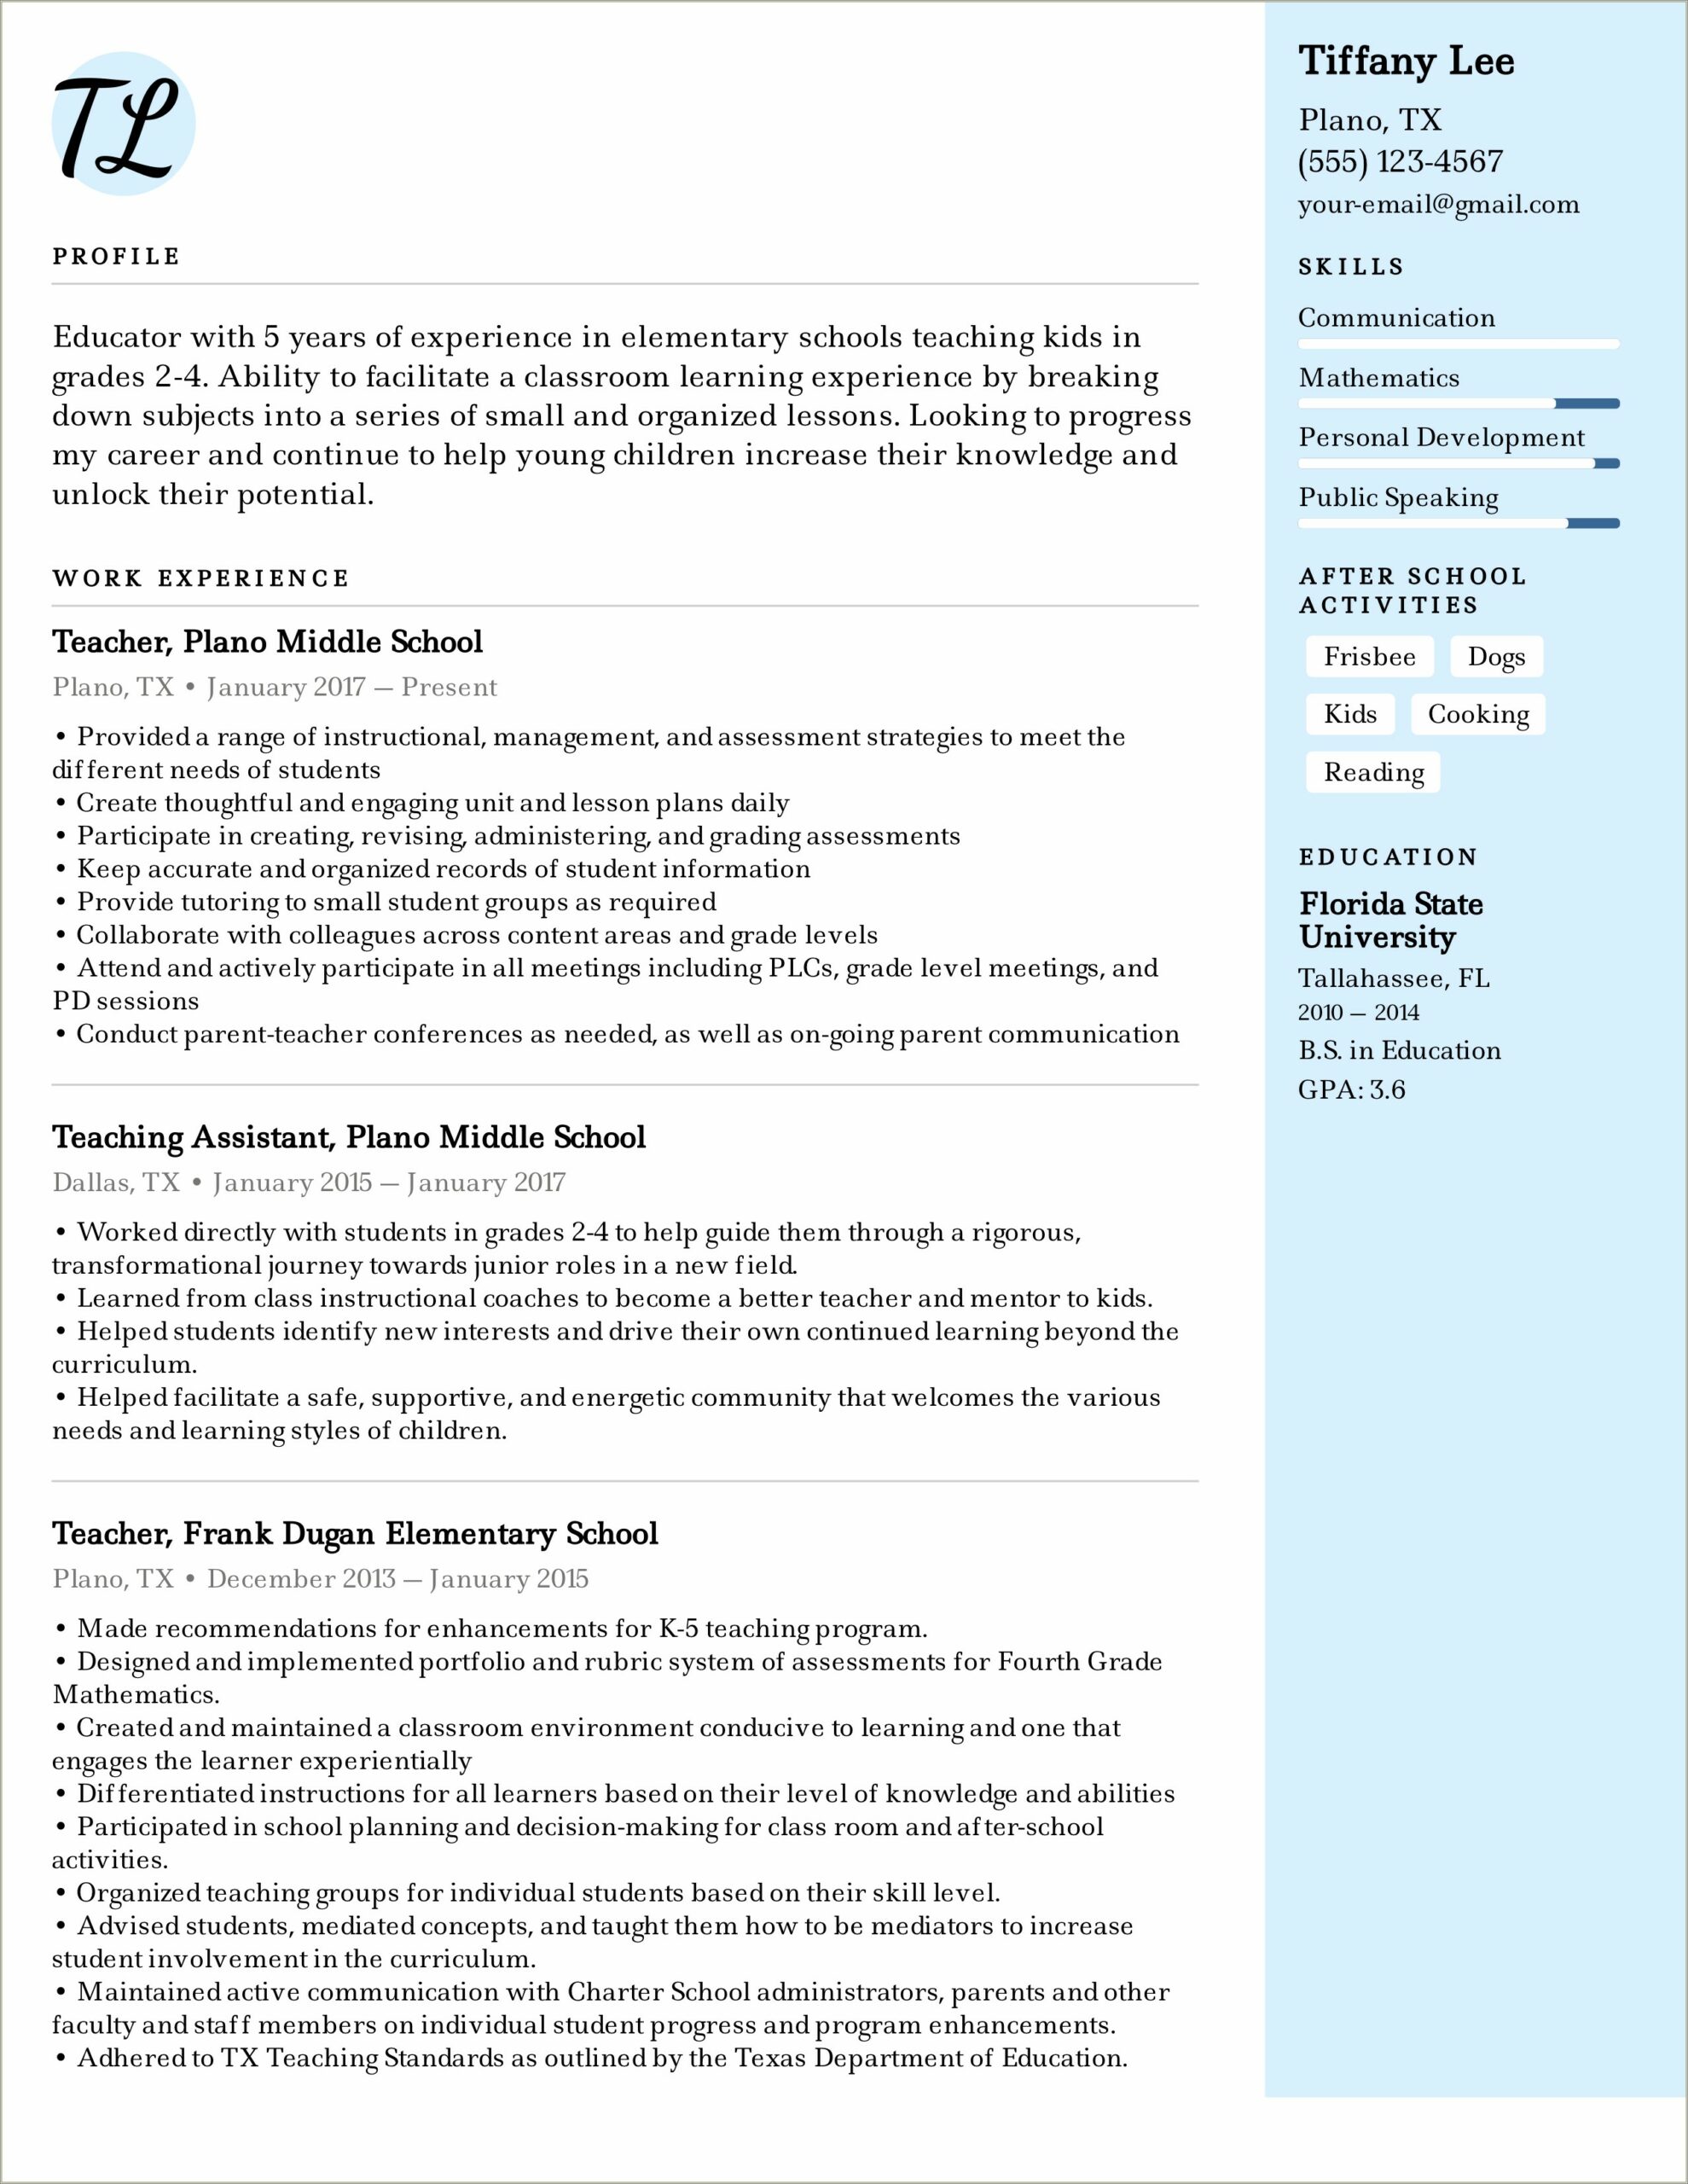 Resume For A Teaching Position Sample